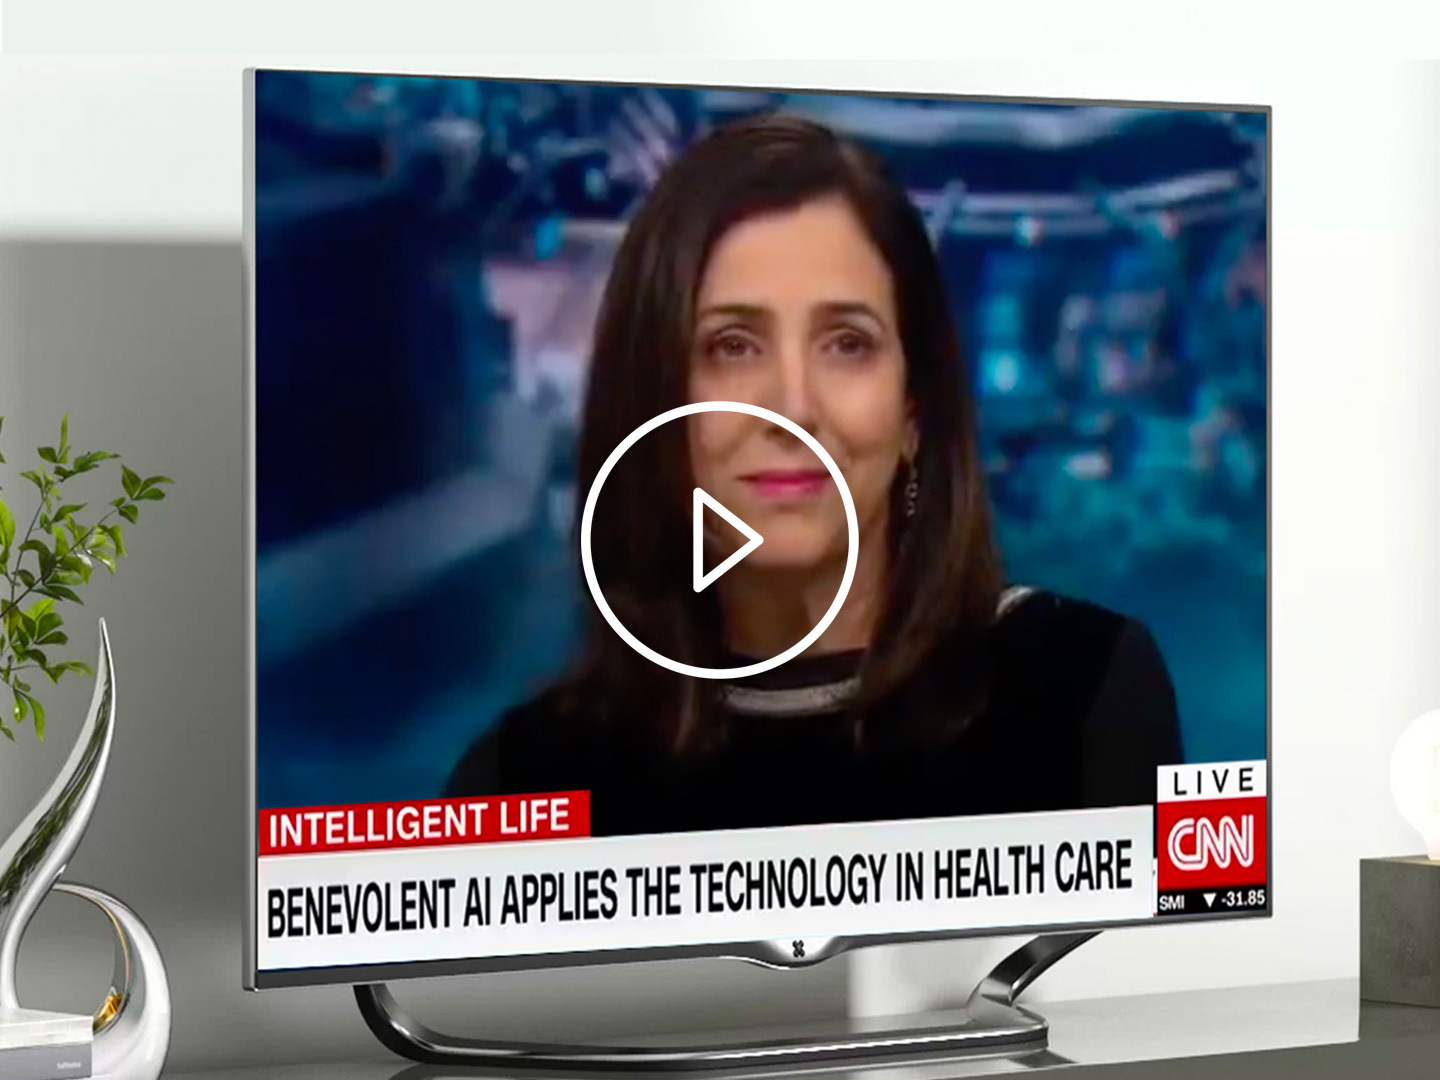 Joanna-Shields-talks-to-CNN-about-the-power-of-AI-in-healthcare.jpg